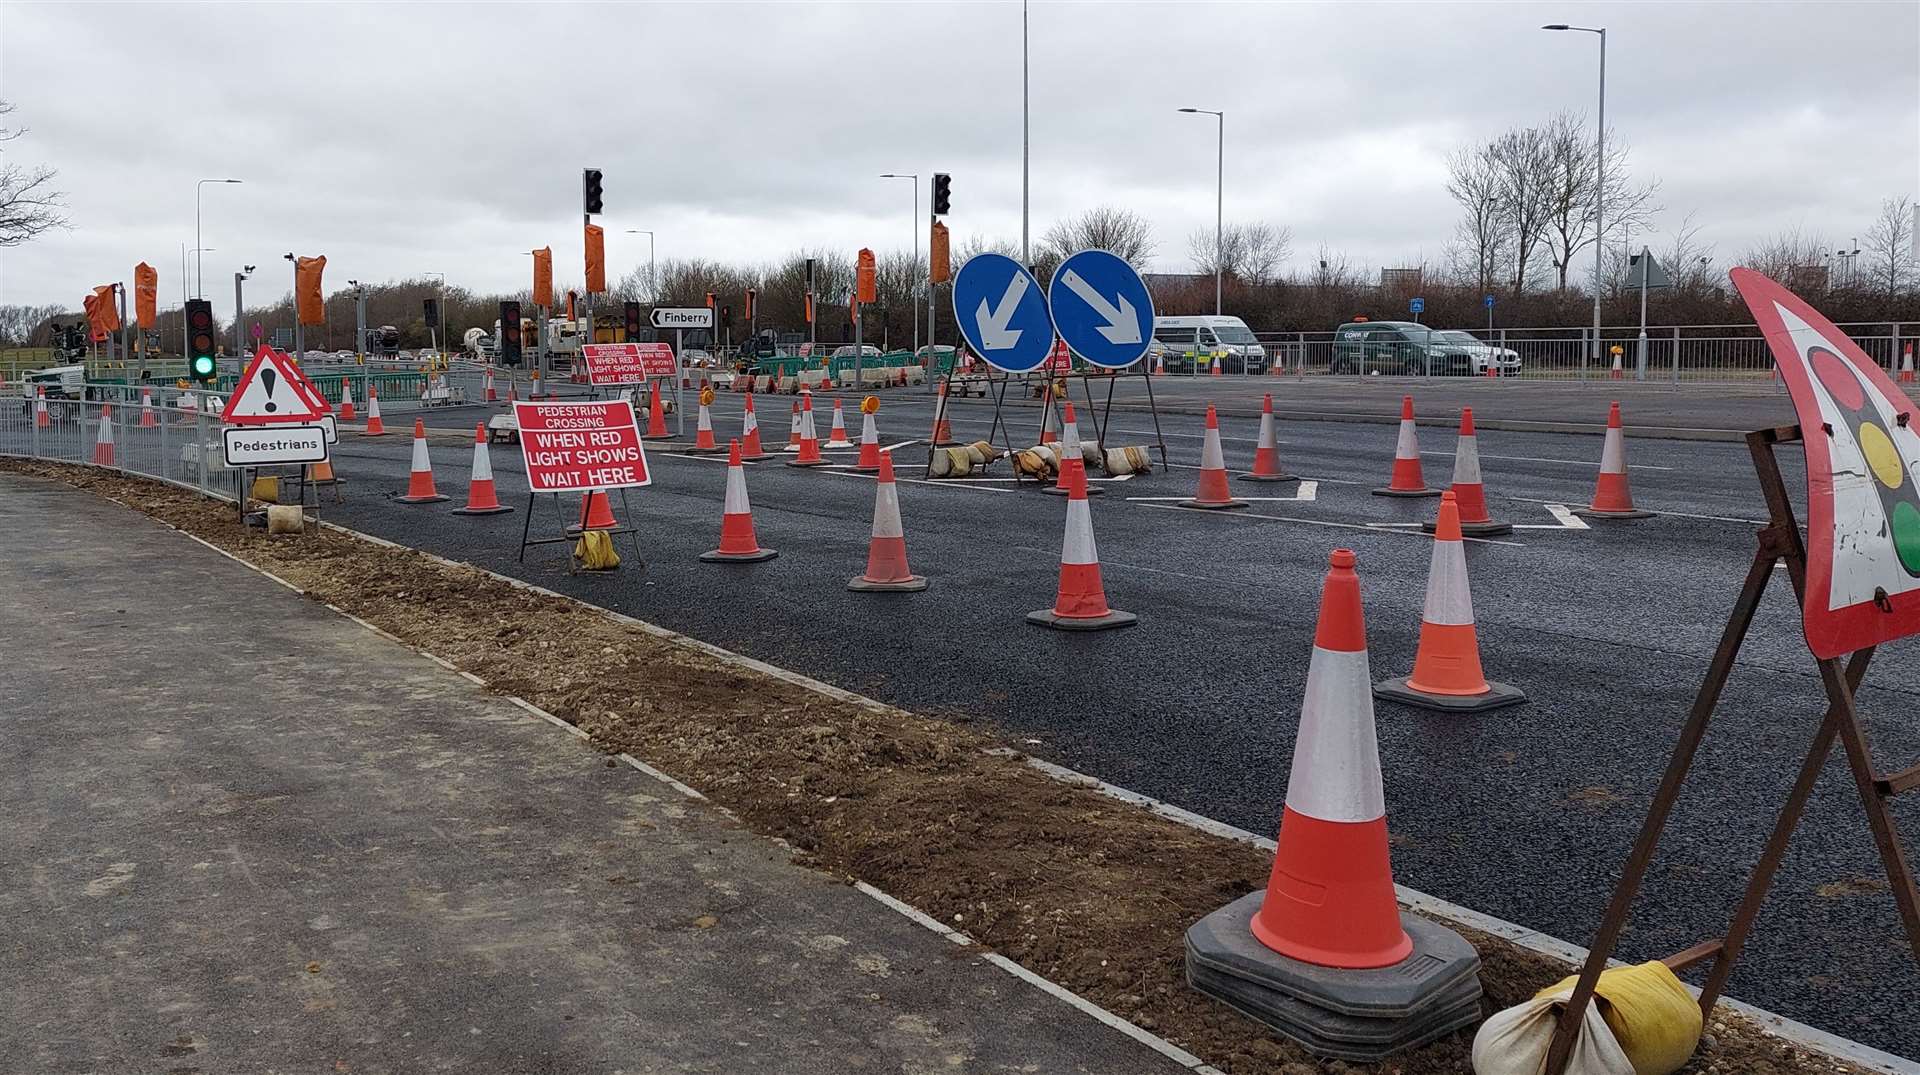 The new junction will allow drivers from Finberry to turn right onto the A2070 for the first time